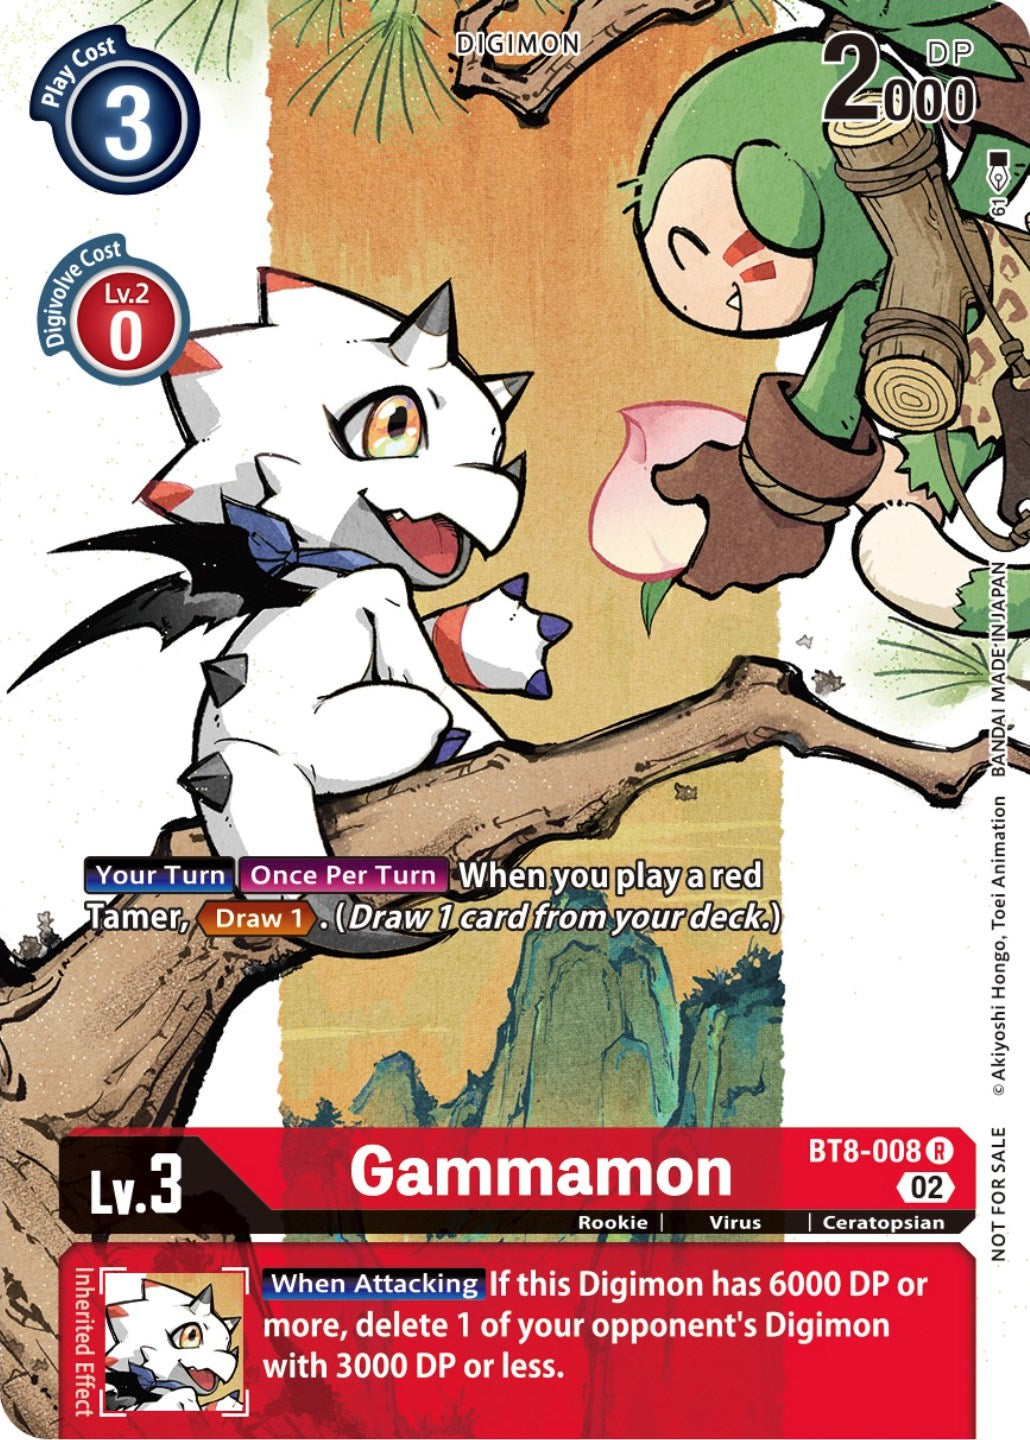 Gammamon [BT8-008] (Digimon Illustration Competition Promotion Pack) [New Awakening Promos] | Shuffle n Cut Hobbies & Games